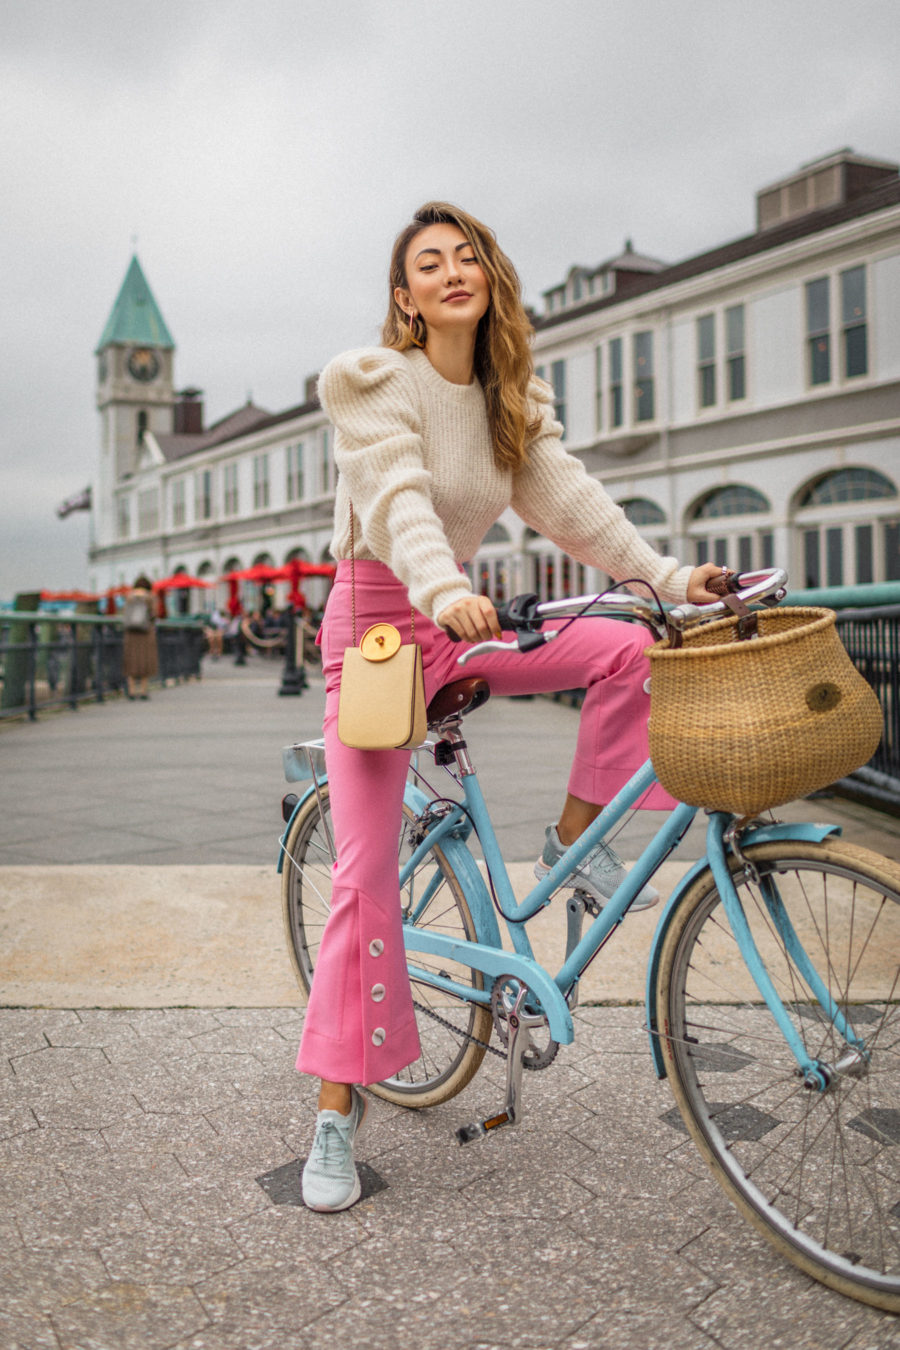 Sneaker Trends to Shop and Wear - Pink Trousers with sneakers, Nike Epic React Sneakers, fashion sneakers // Notjessfashion.com